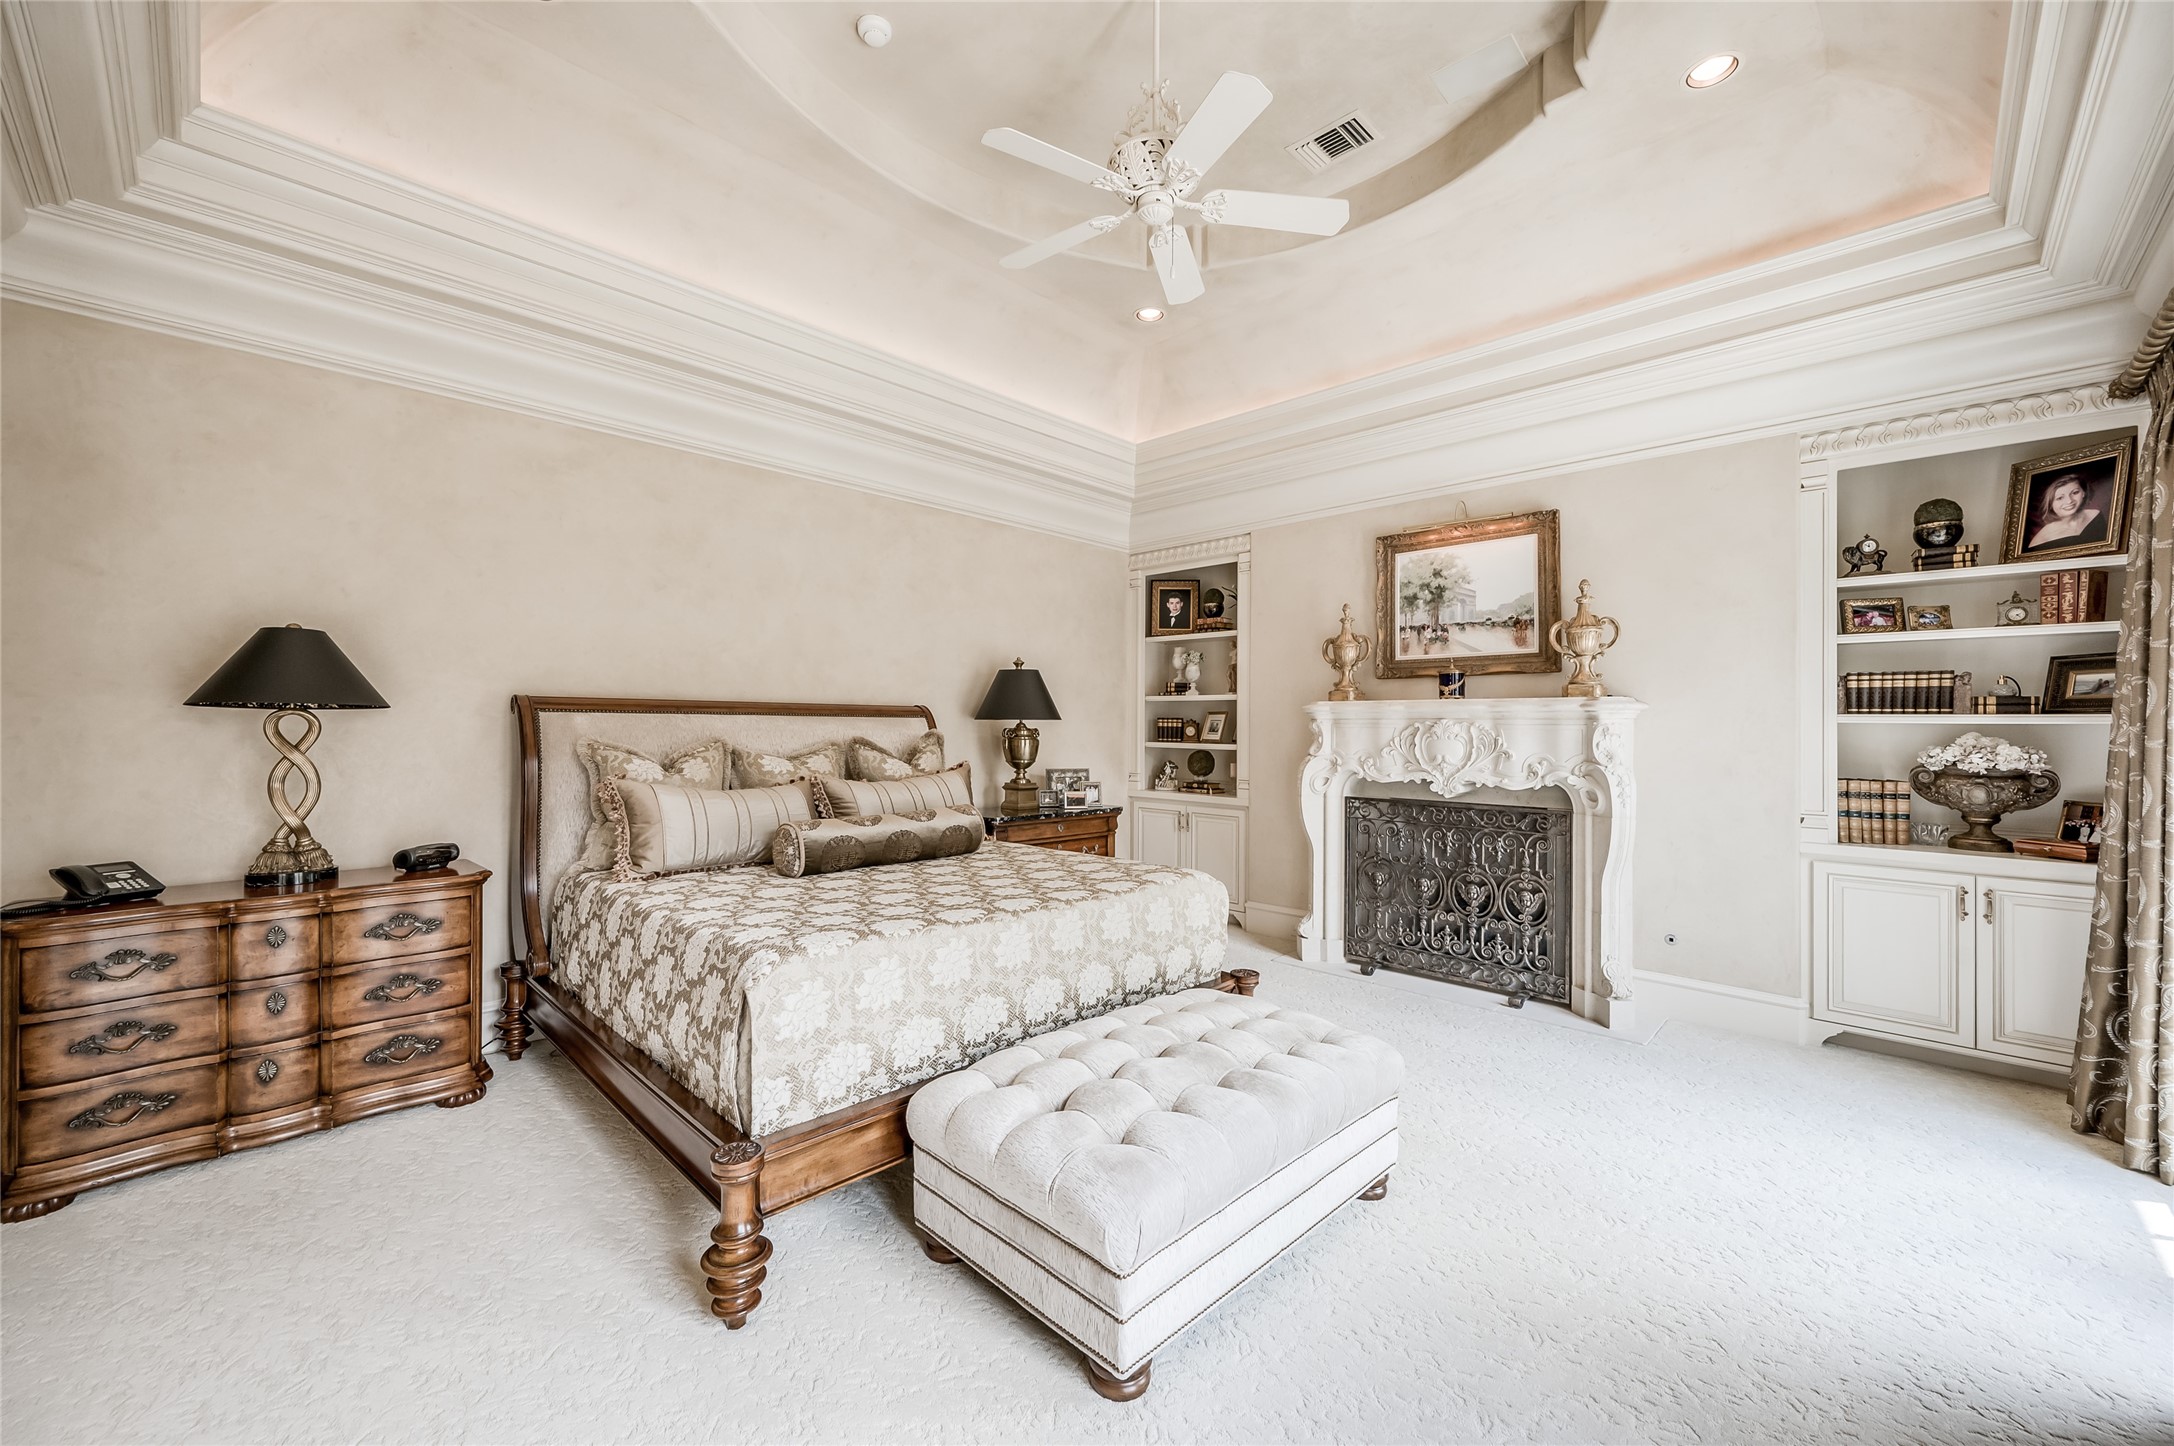 [Primary Bedroom]
Separated from the morning room by pocket doors, the serene bedroom has an elaborately carved stone fireplace.